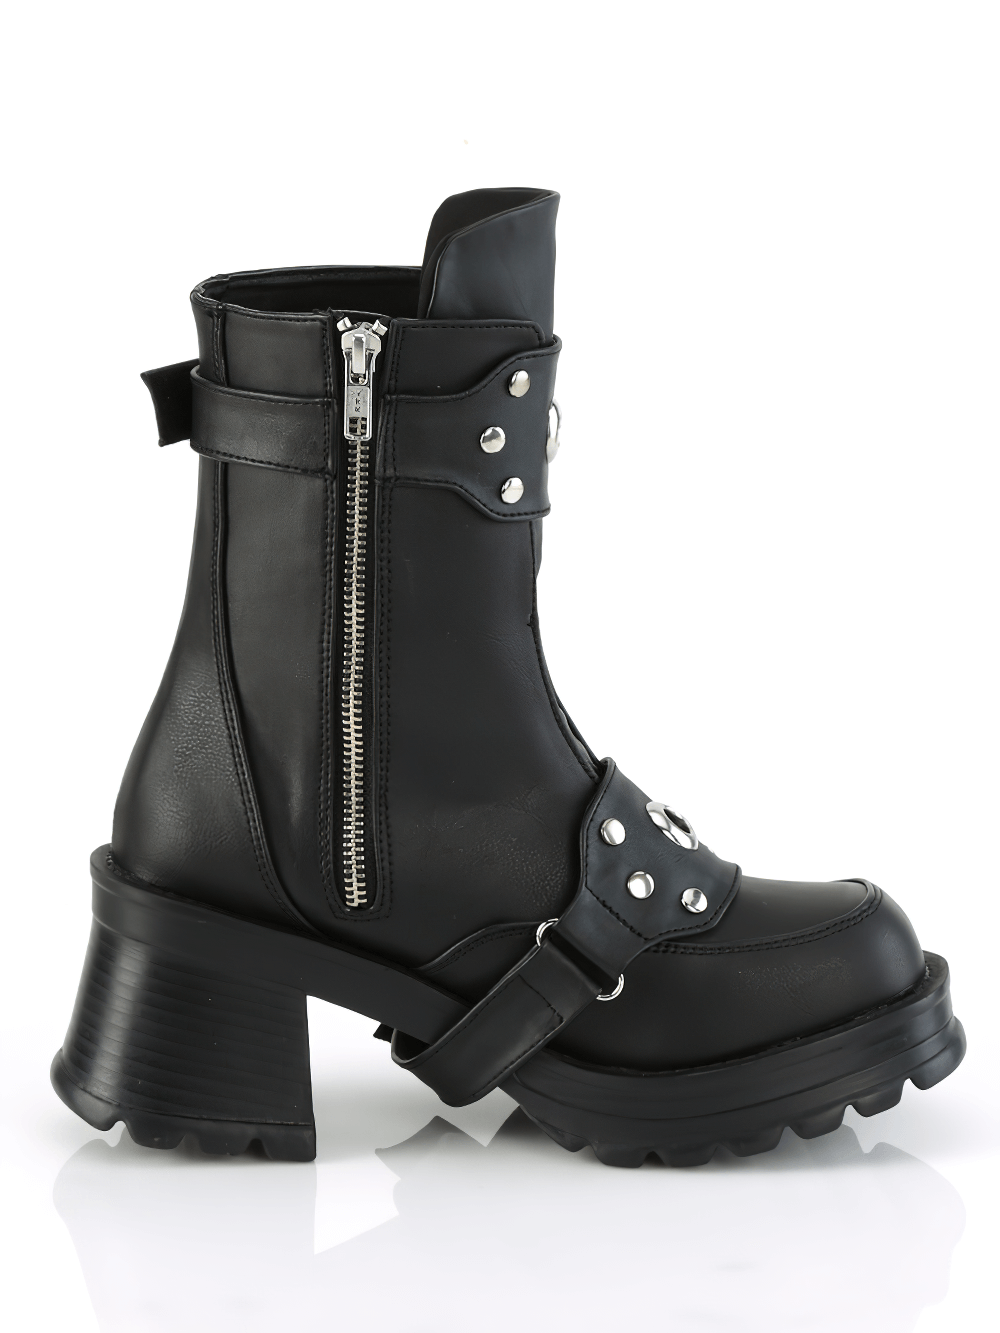 DEMONIA Chunky Heels Black Ankle Boots with Buckles